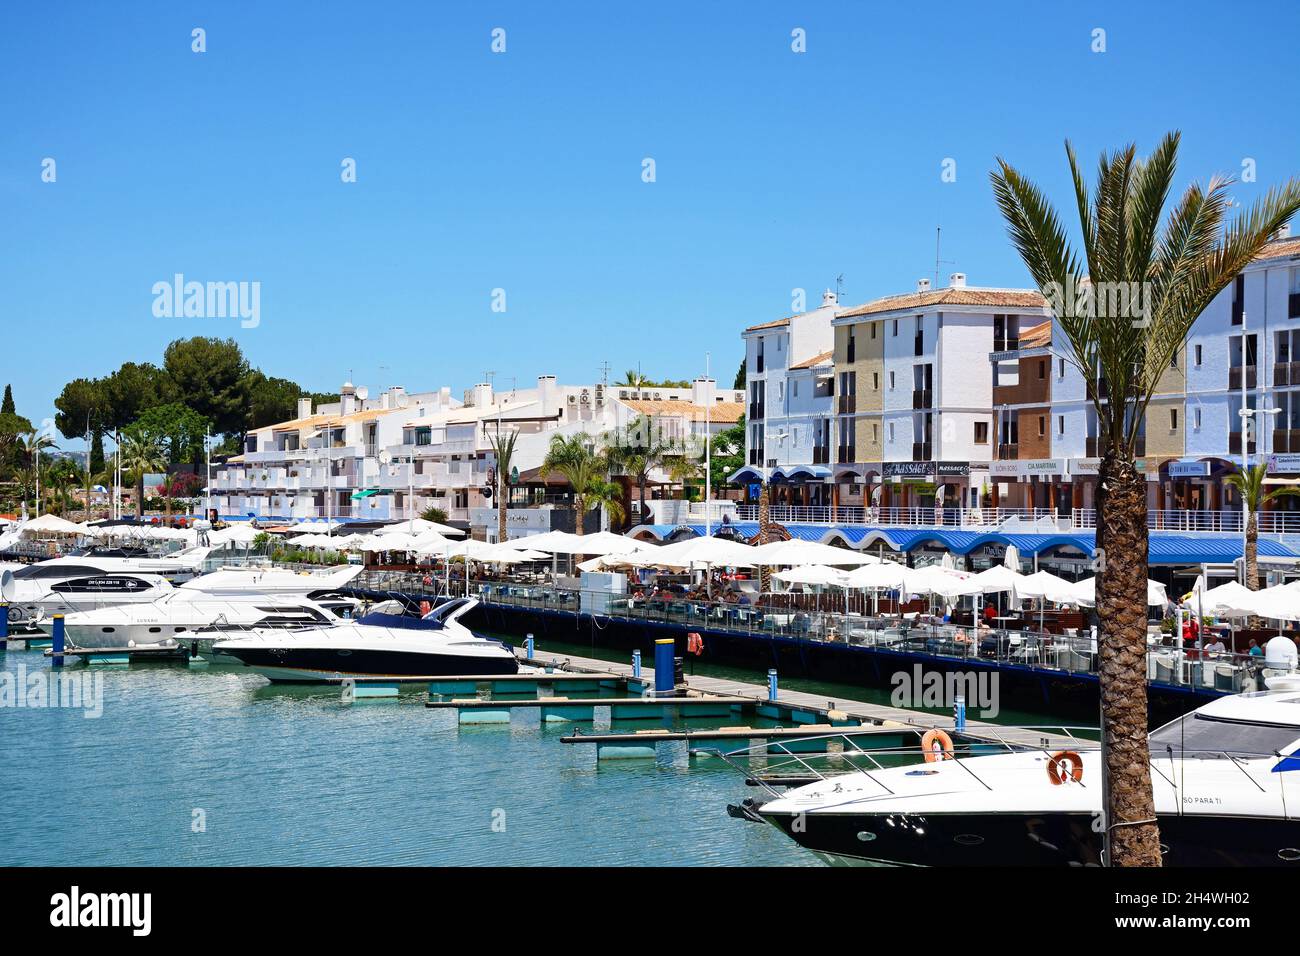 Luxury boats moored in the marina with waterfront restaurants to the rear, Vilamoura, Algarve, Portugal, Europe. Stock Photo